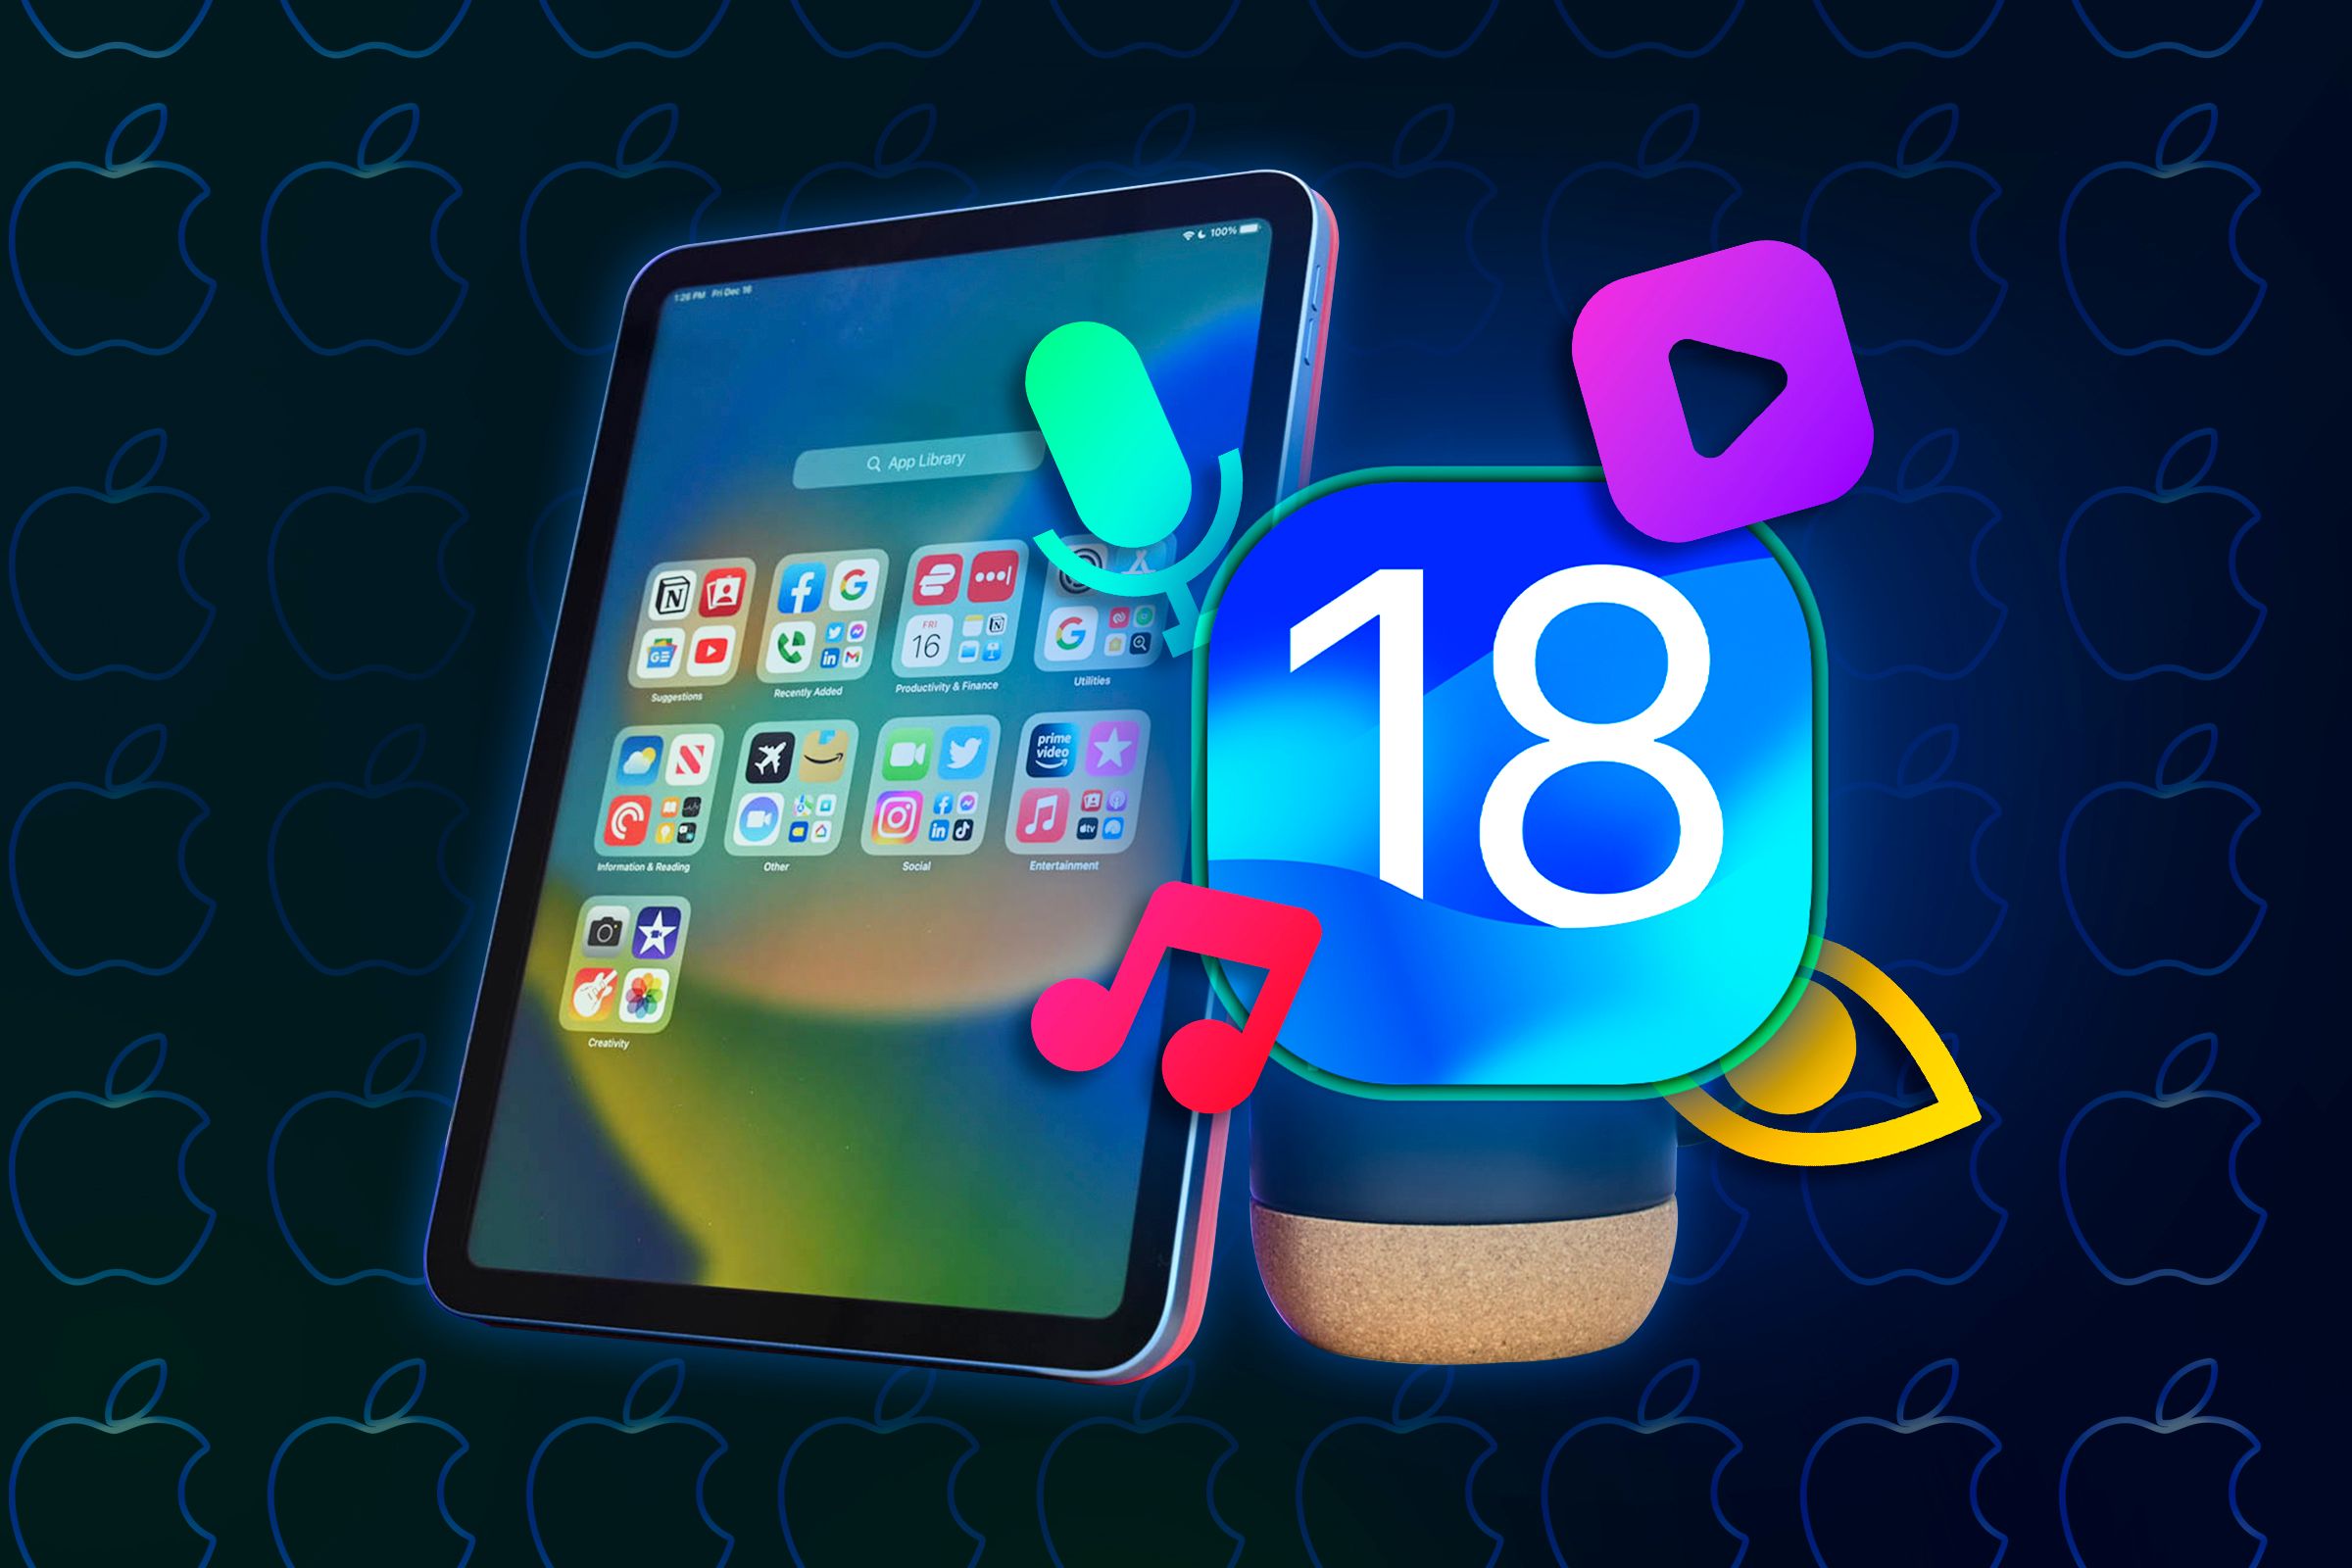 An iPad with an iOS 18 icon next to it and some icons of the new accessibility features.